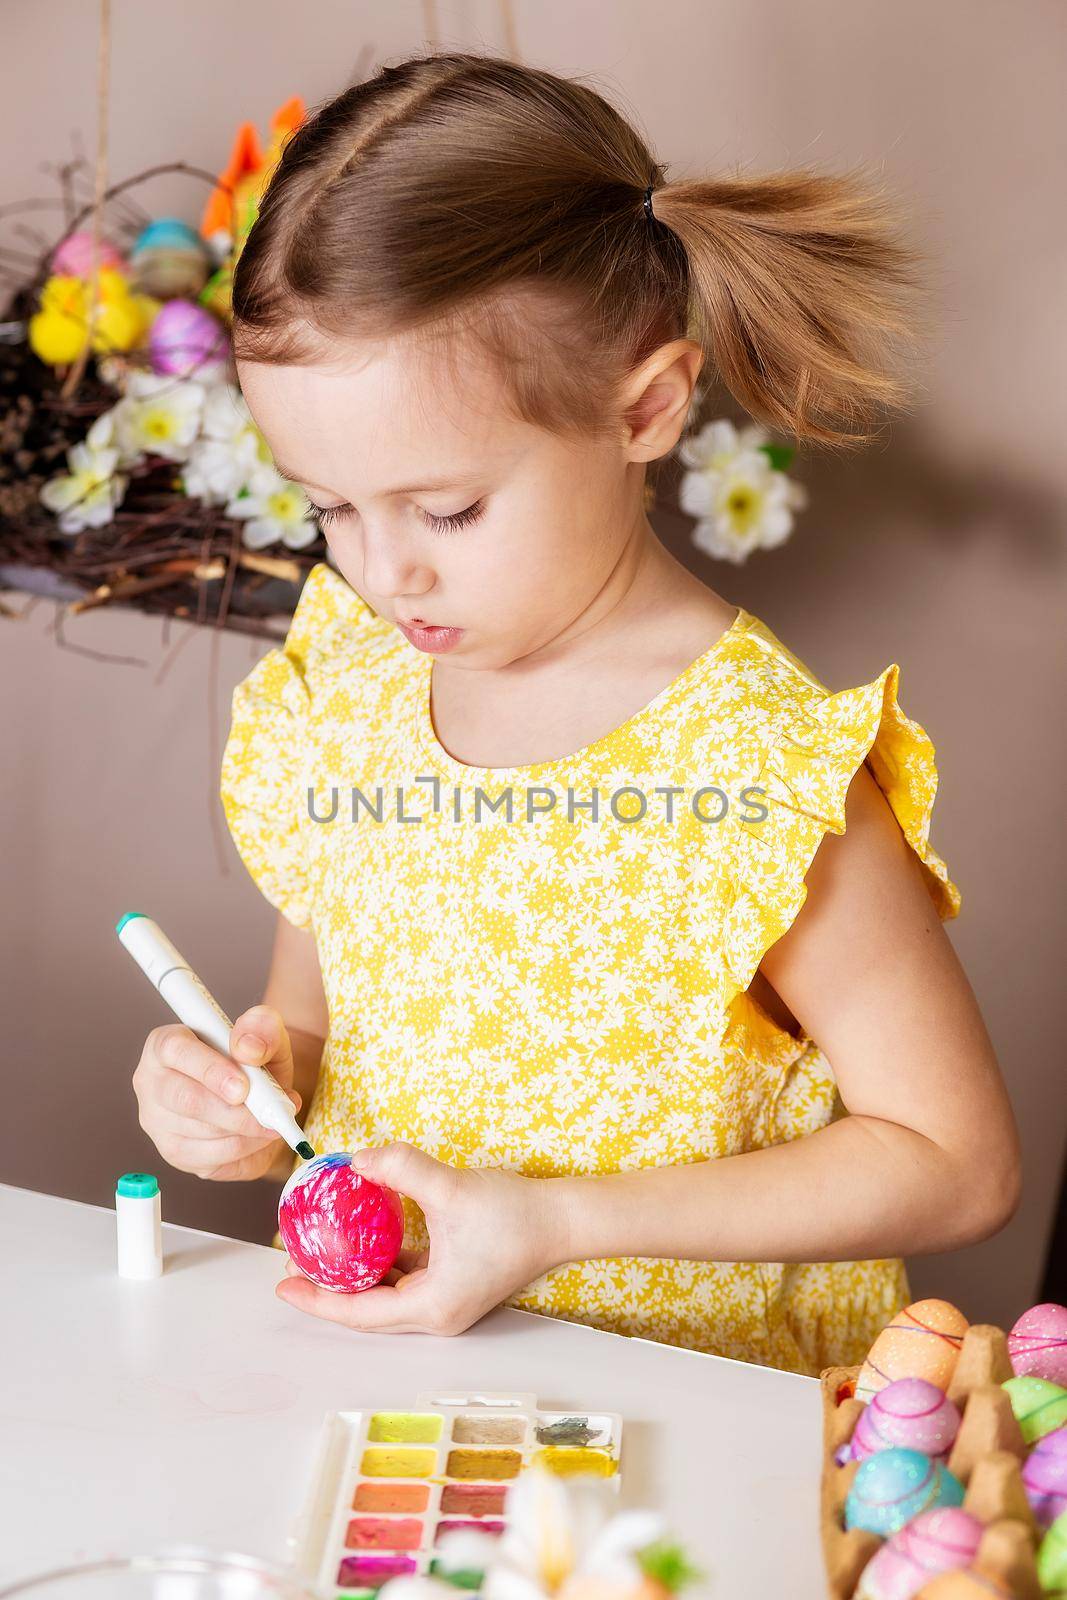 A small Caucasian girl of 5 years old paints eggs with special markers for the Christian spring holiday of Easter. The girl is dressed in a yellow floral dress and has ponytails.